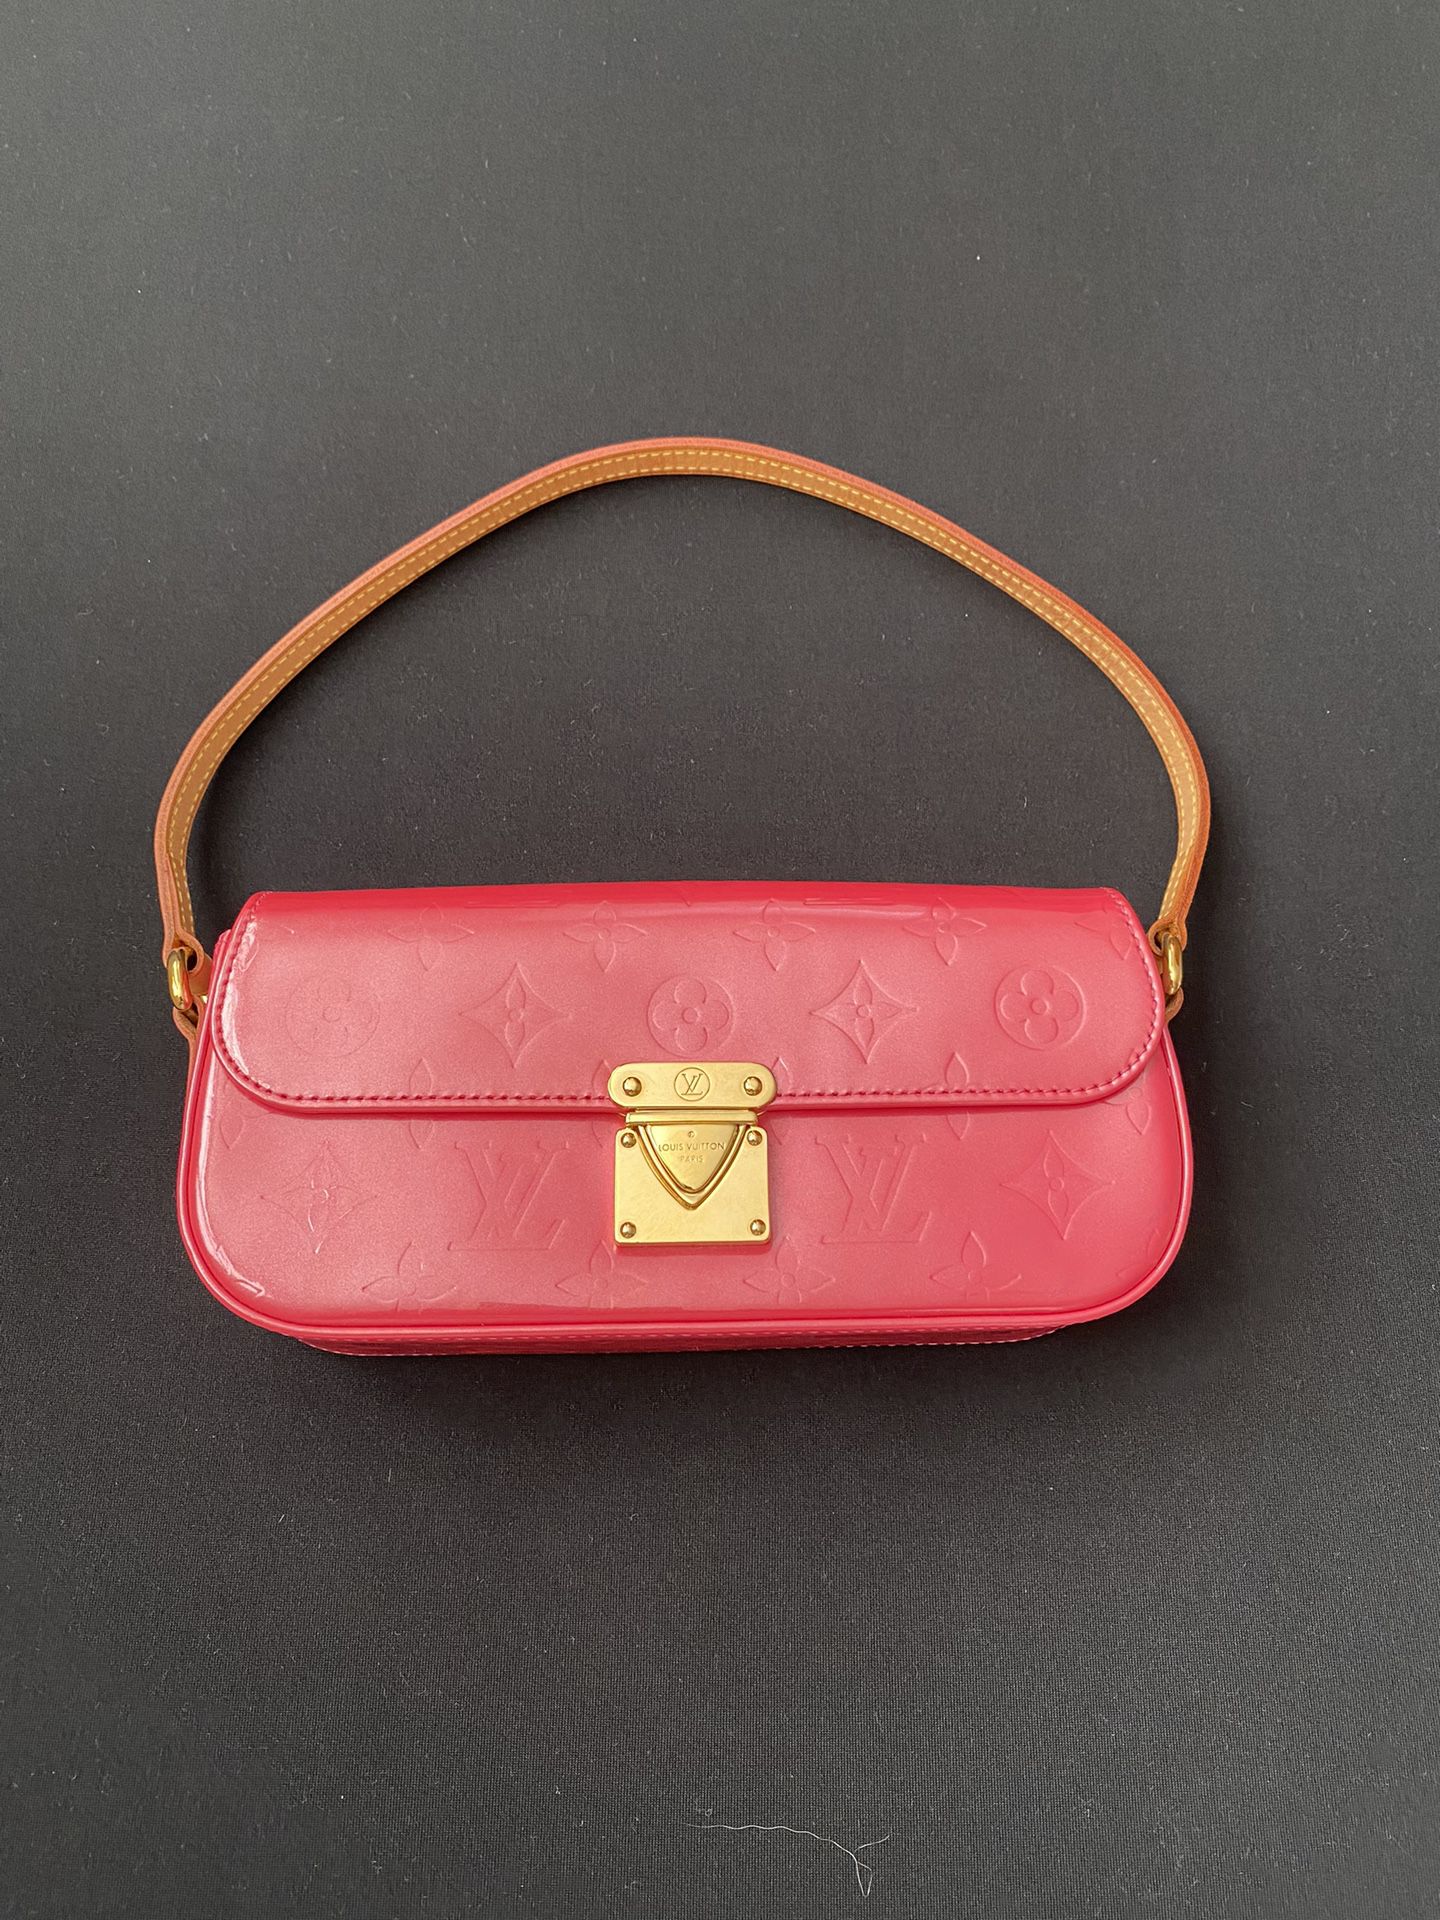 Louis Vuitton Vernis Reade PM for Sale in Hicksville, NY - OfferUp